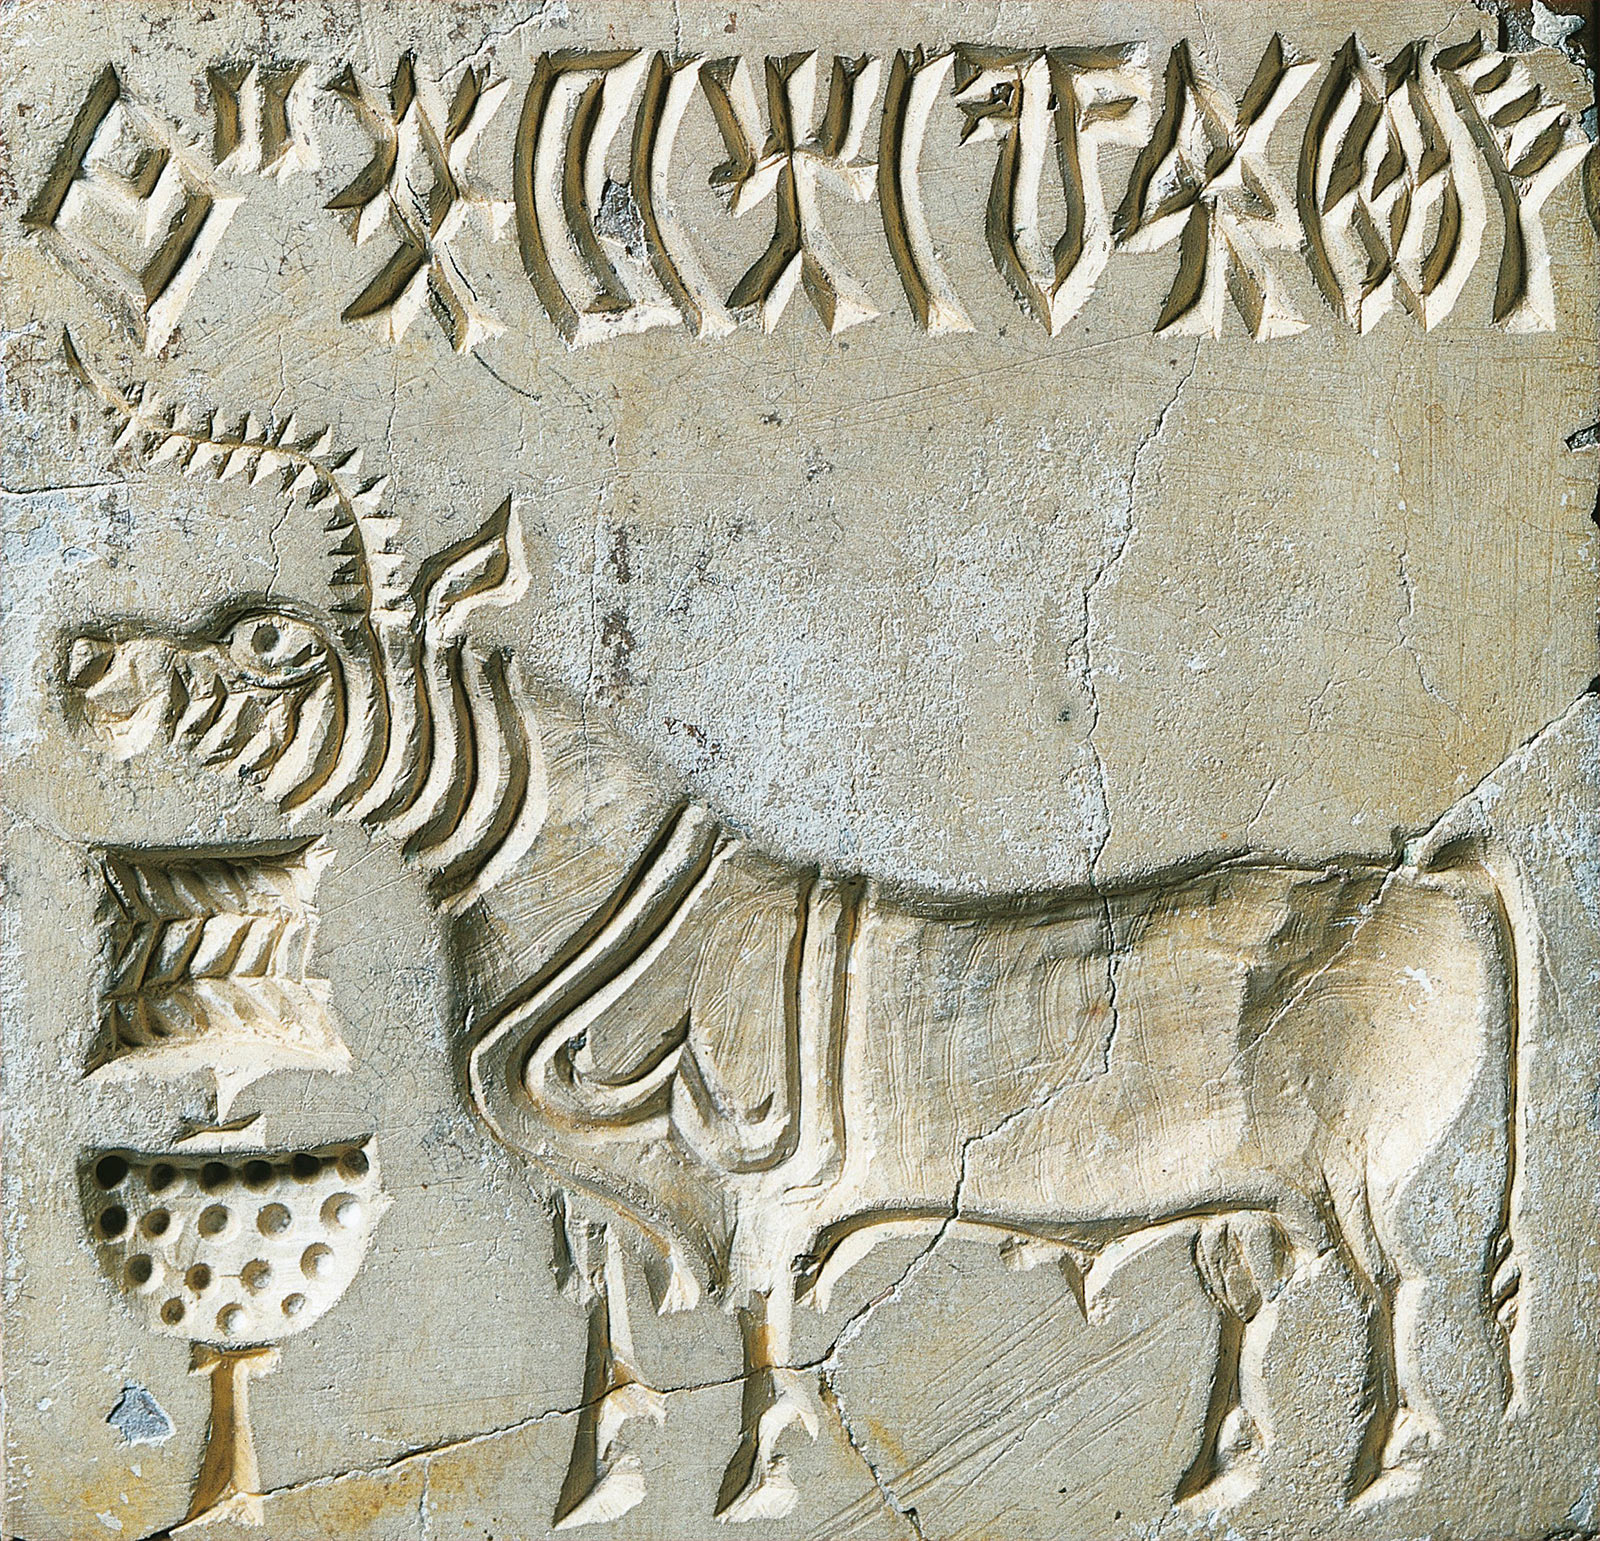 Steatite seal from the Indus valley, c.2500 BC. The script is still undeciphered.